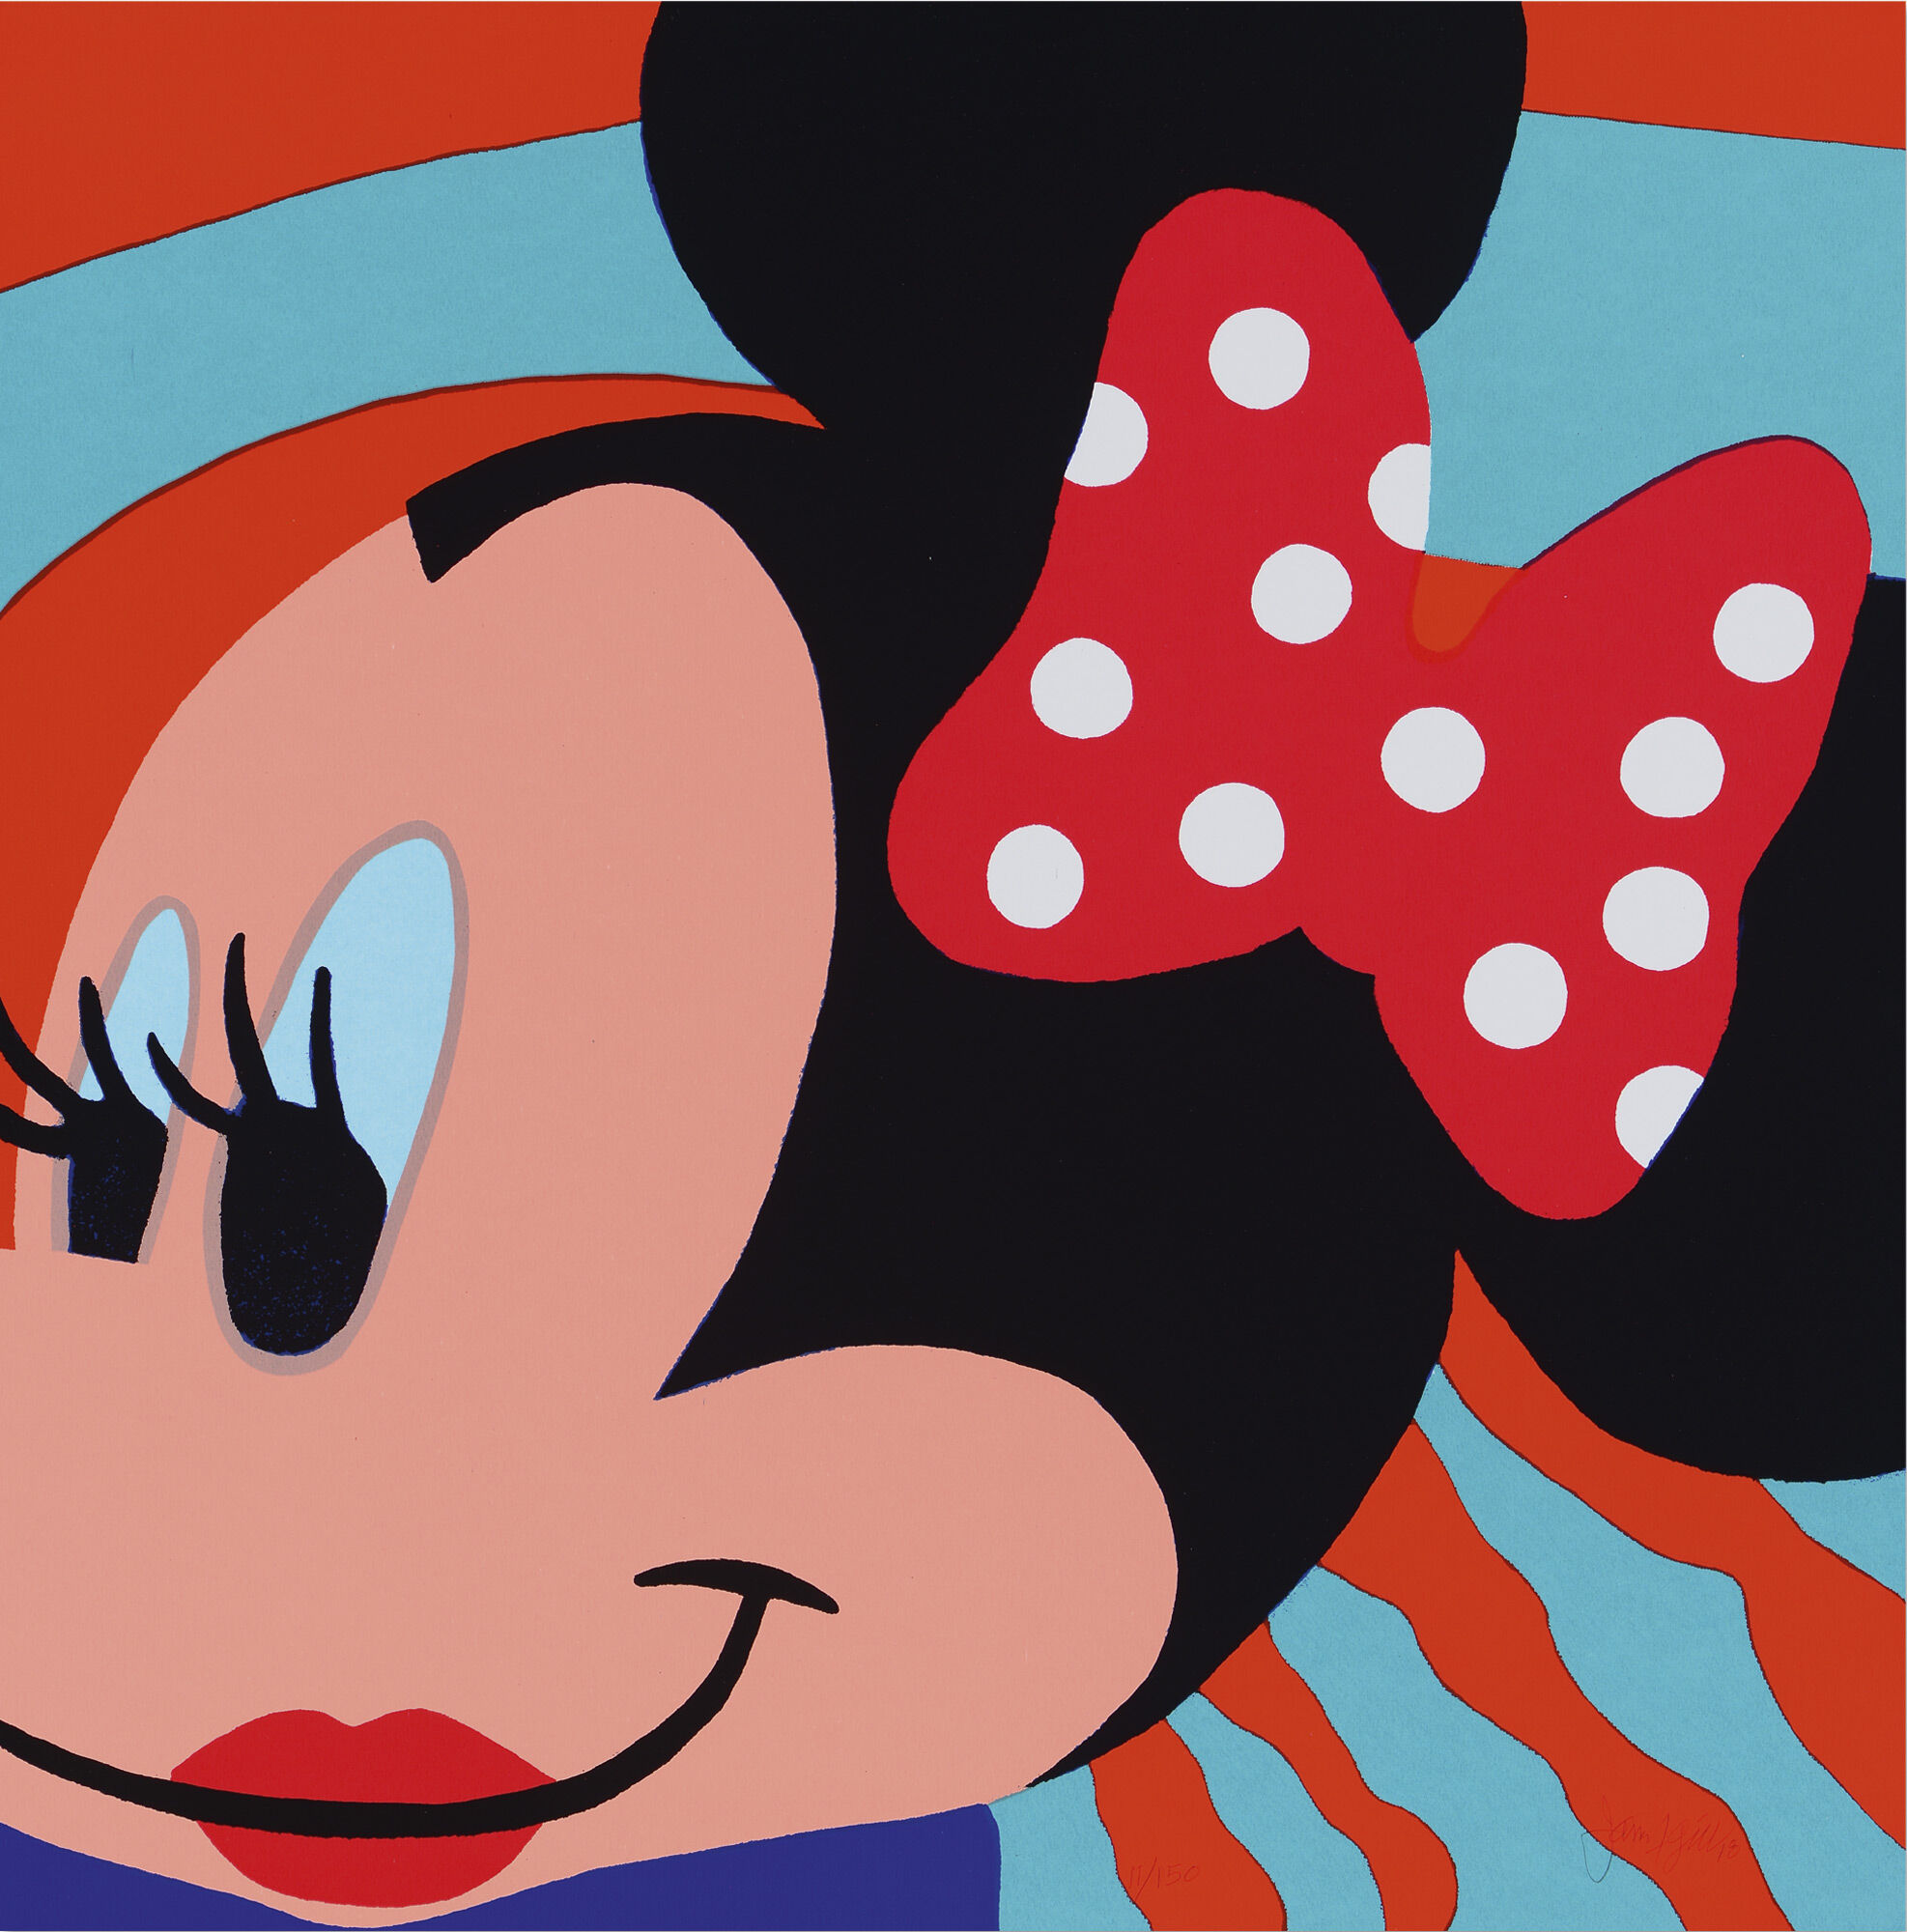 Picture "Minnie" (2018) by James Francis Gill